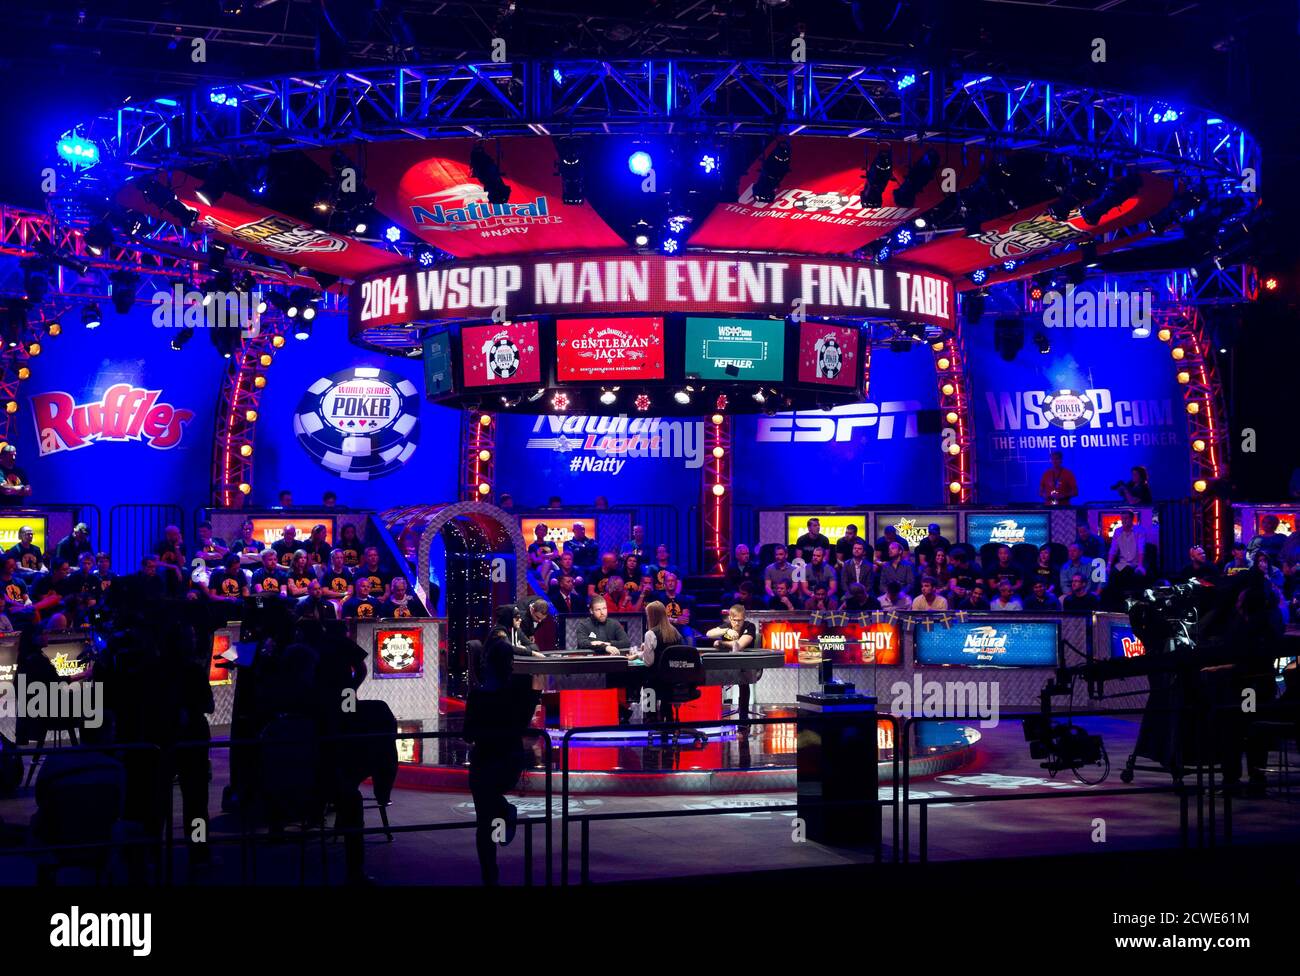 Poker players compete for a $10 million first prize at the 2014 World  Series of Poker main event final table at the Rio hotel-casino in Las Vegas,  Nevada, November 11, 2014. At